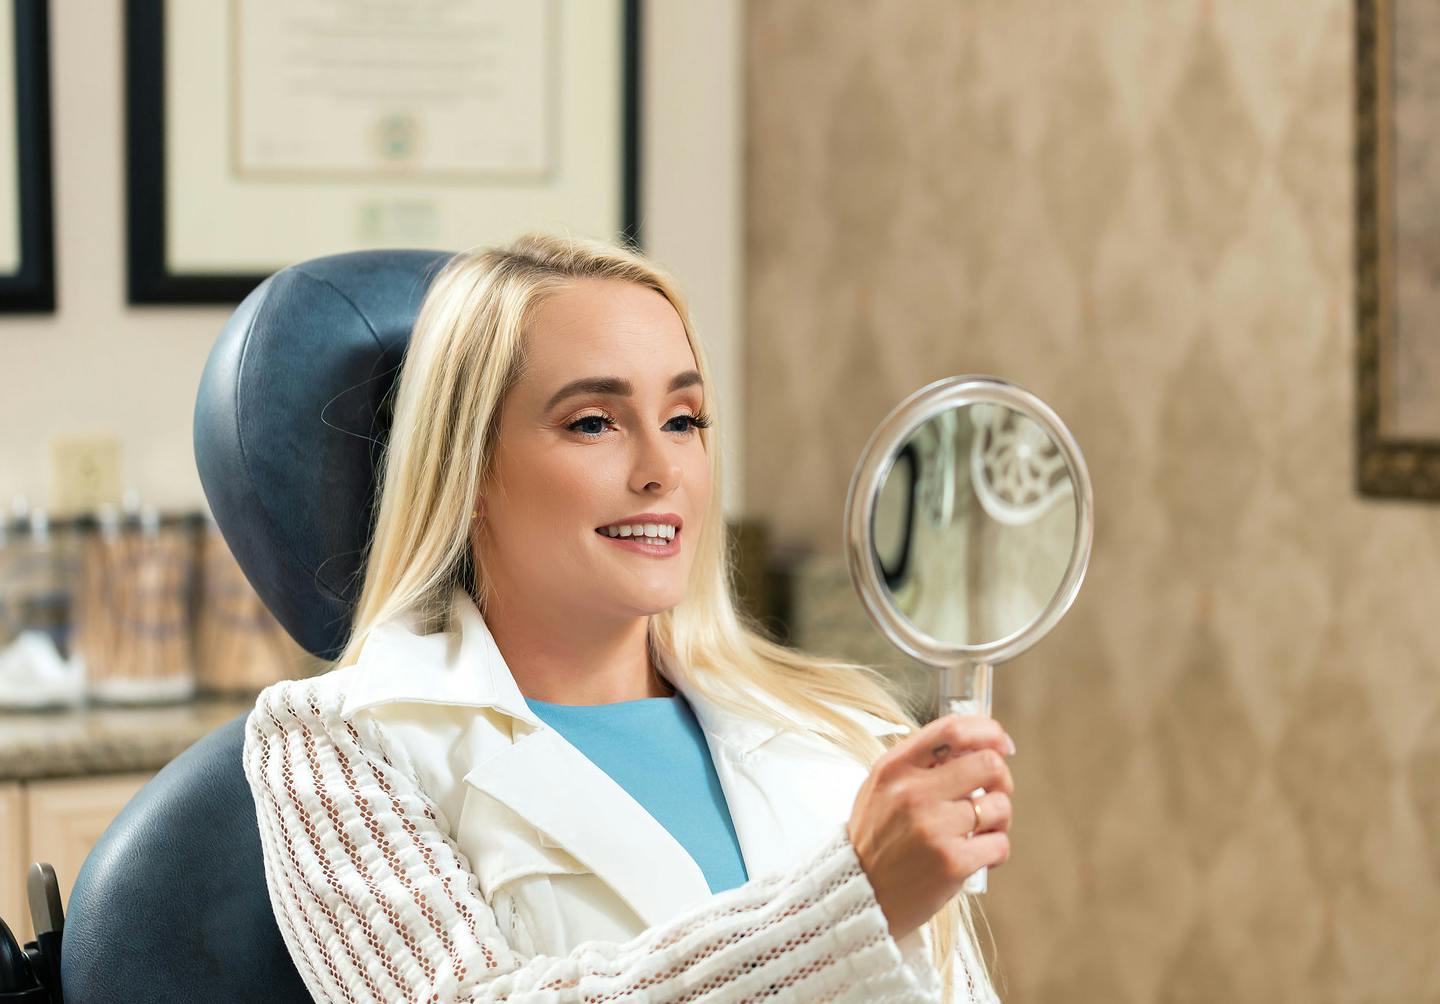 blond woman in a chair holding a mirror and smiling